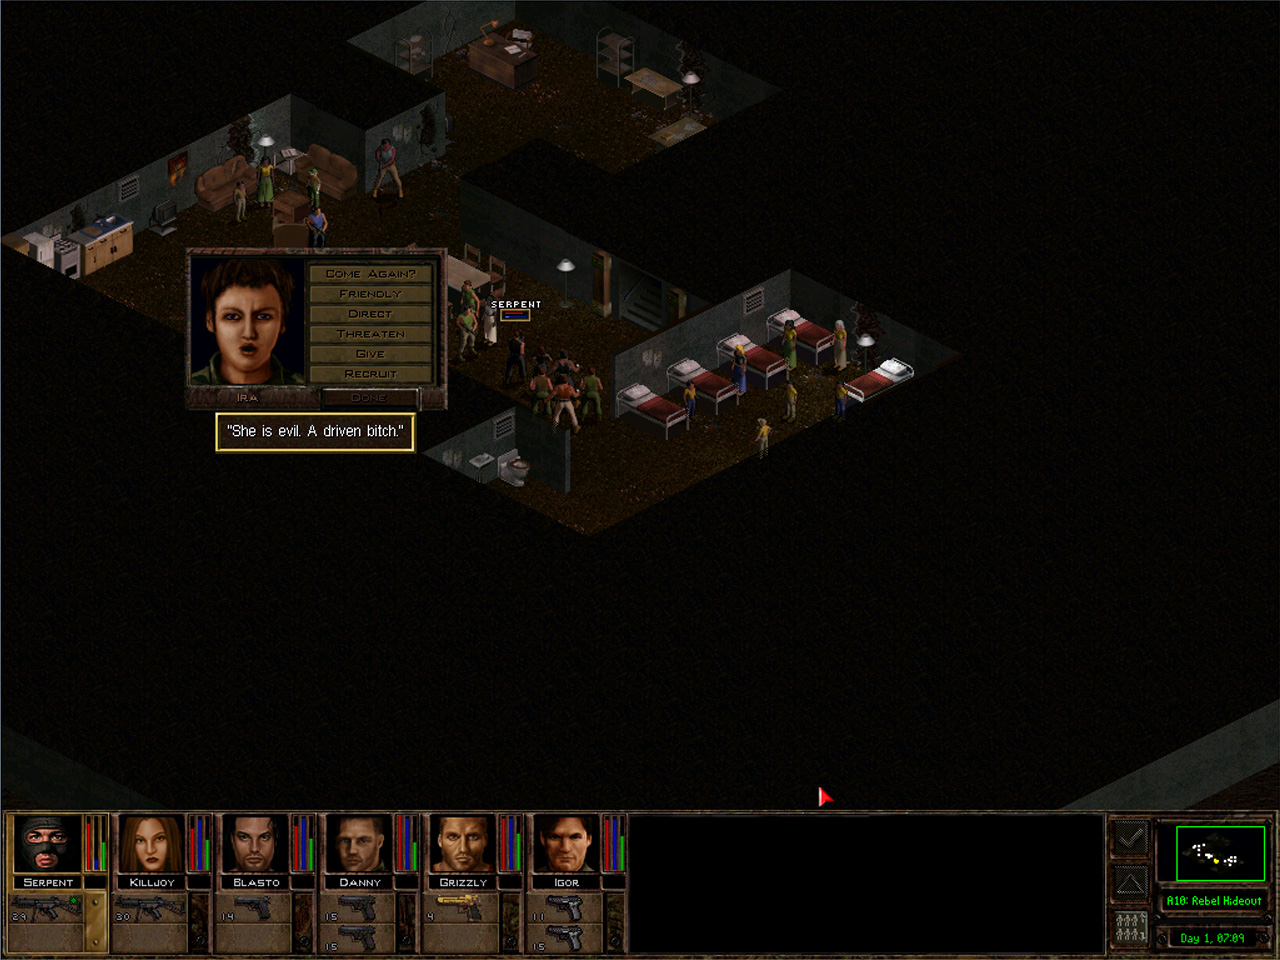 jagged alliance 2 gold vs unfinished business